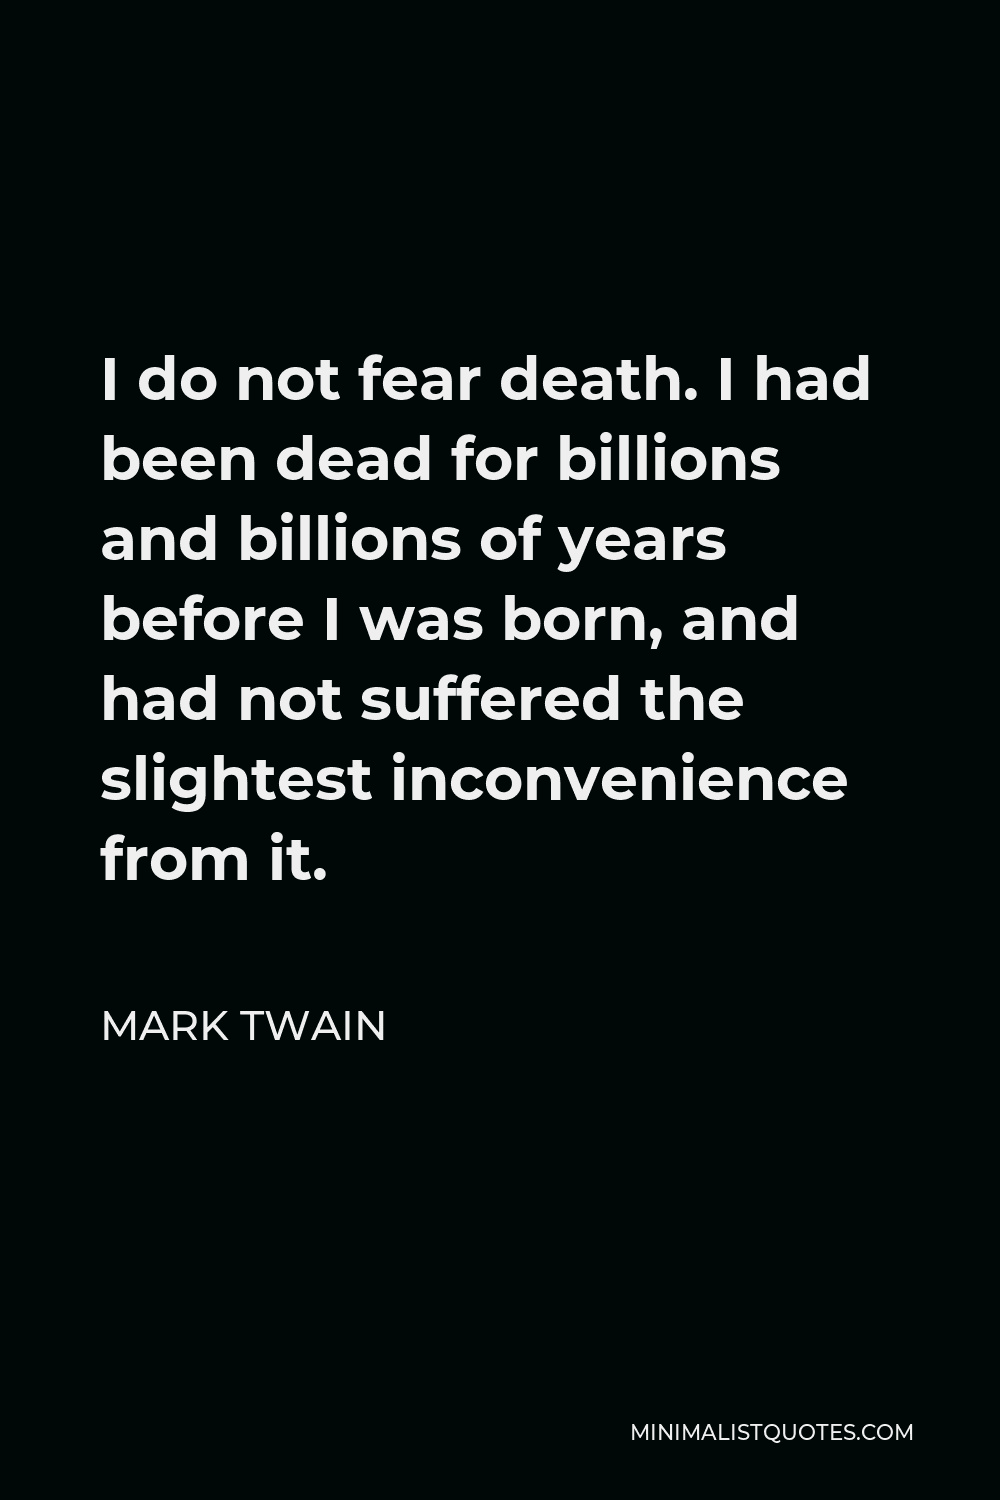 Mark Twain Quote - I do not fear death. I had been dead for billions and billions of years before I was born, and had not suffered the slightest inconvenience from it.